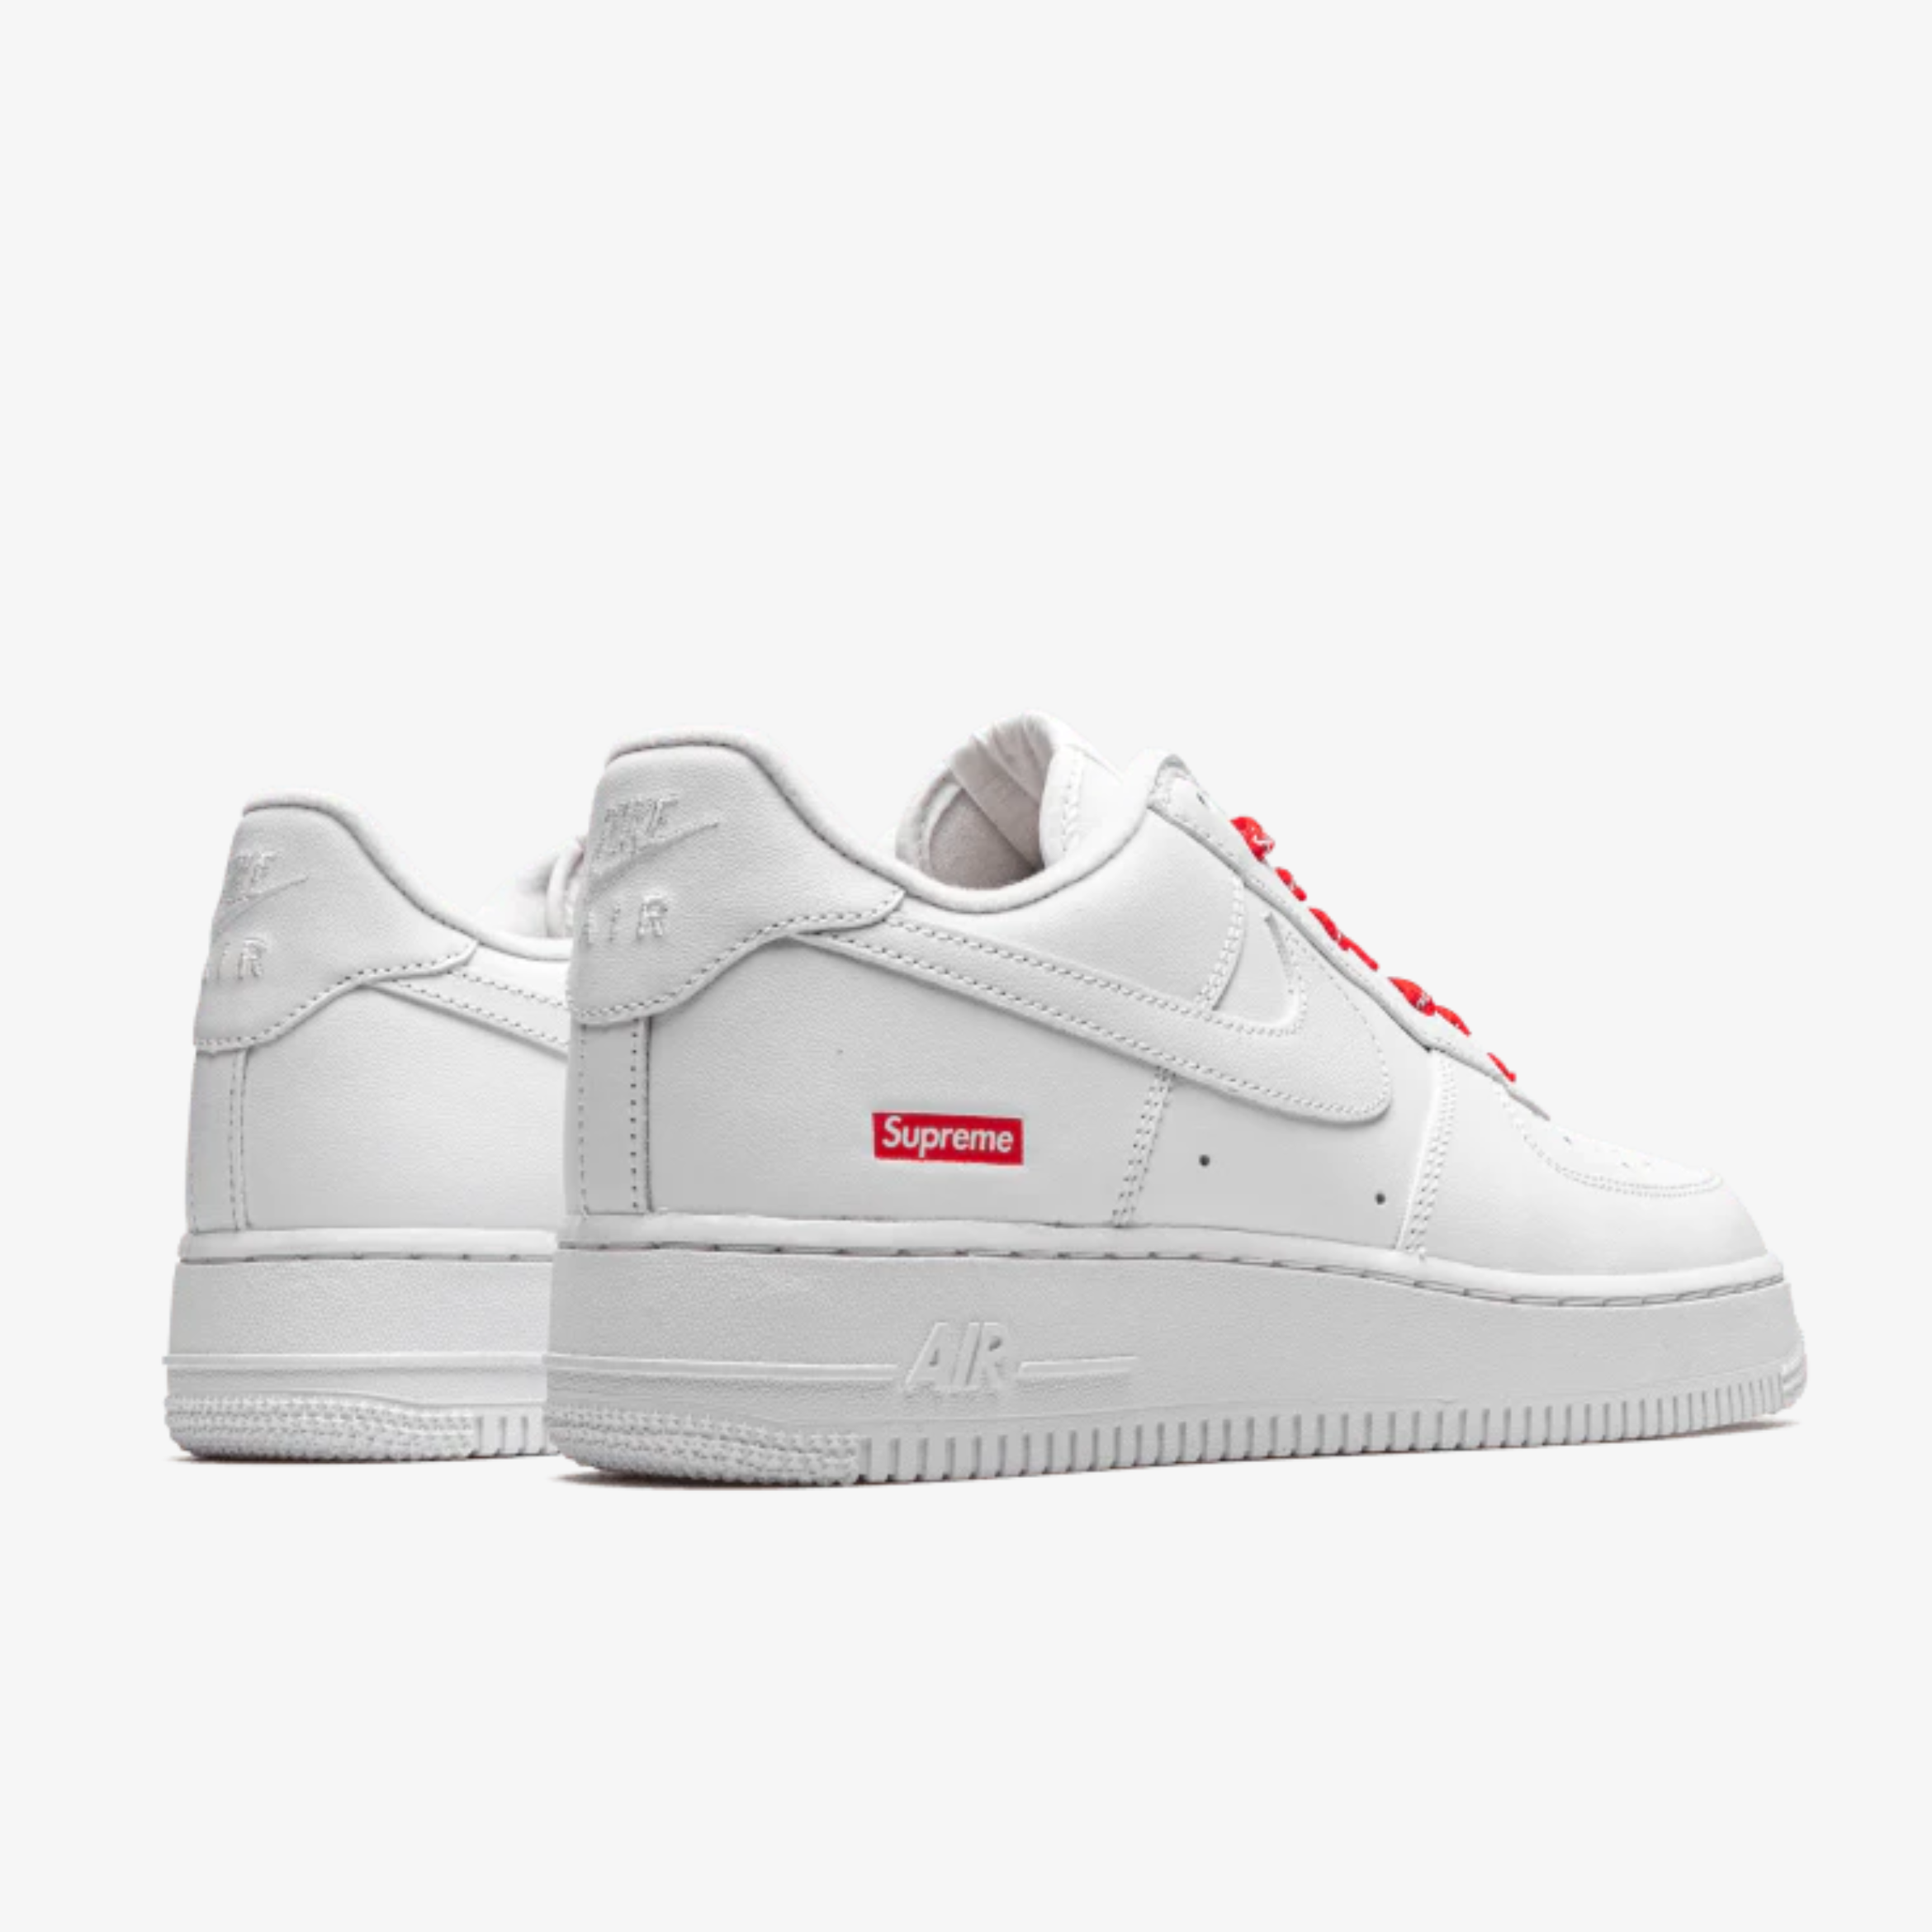 Nike and Supreme Collaborate Again: The Timeless Nike Air Force 1